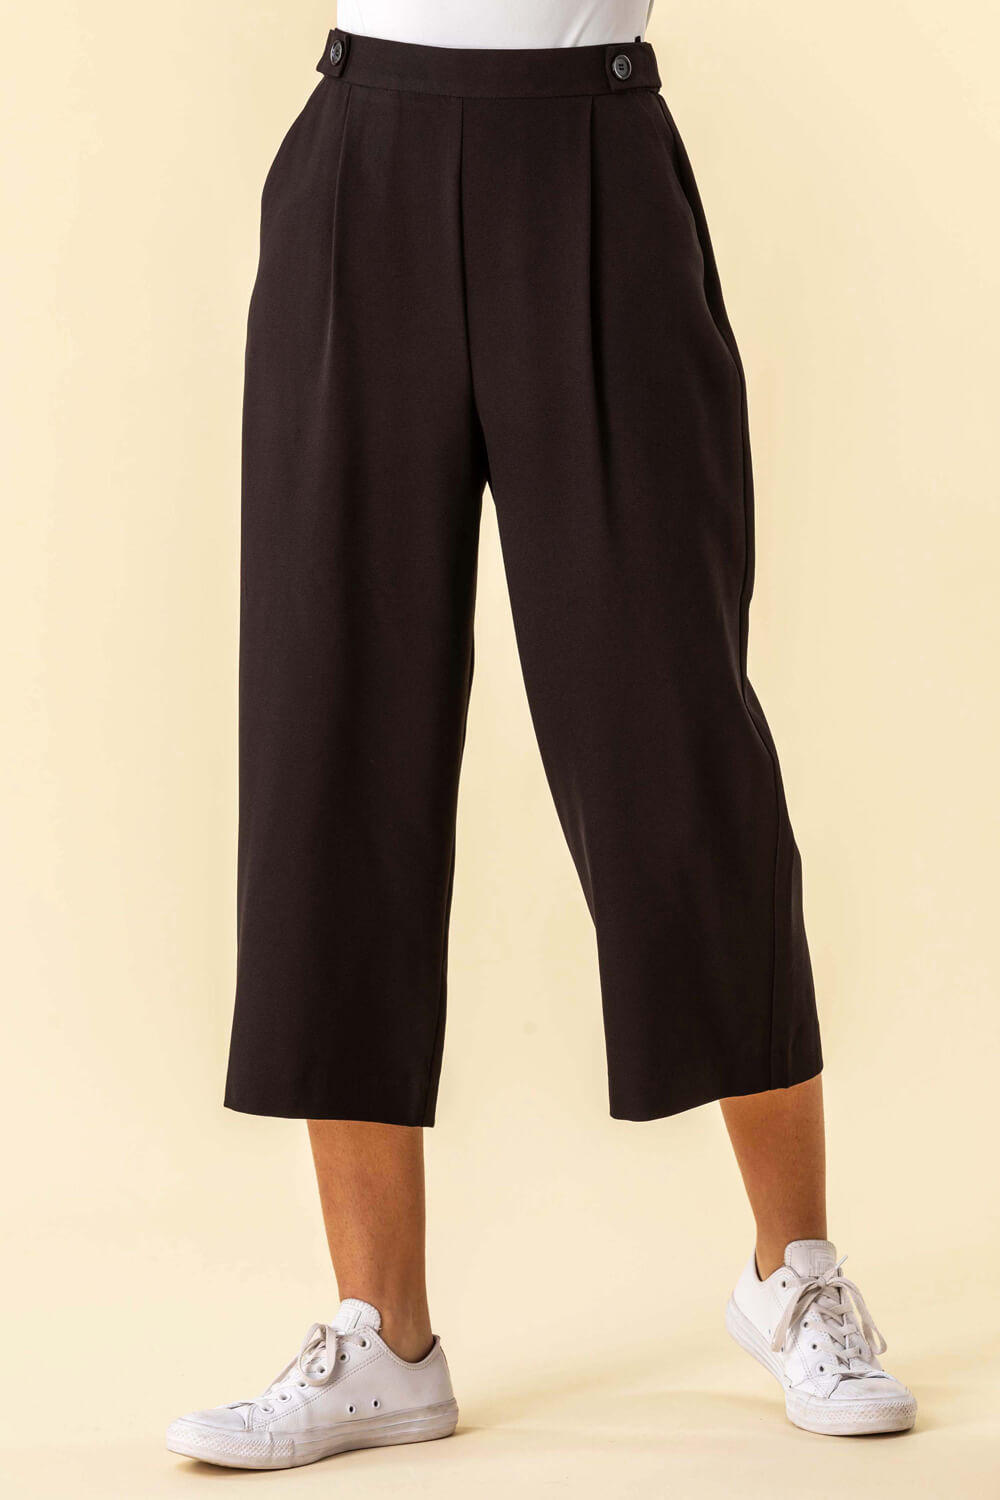 Culottes  Buy Culottes  Culotte Pants Online For Women at Best Prices in  India  Flipkartcom